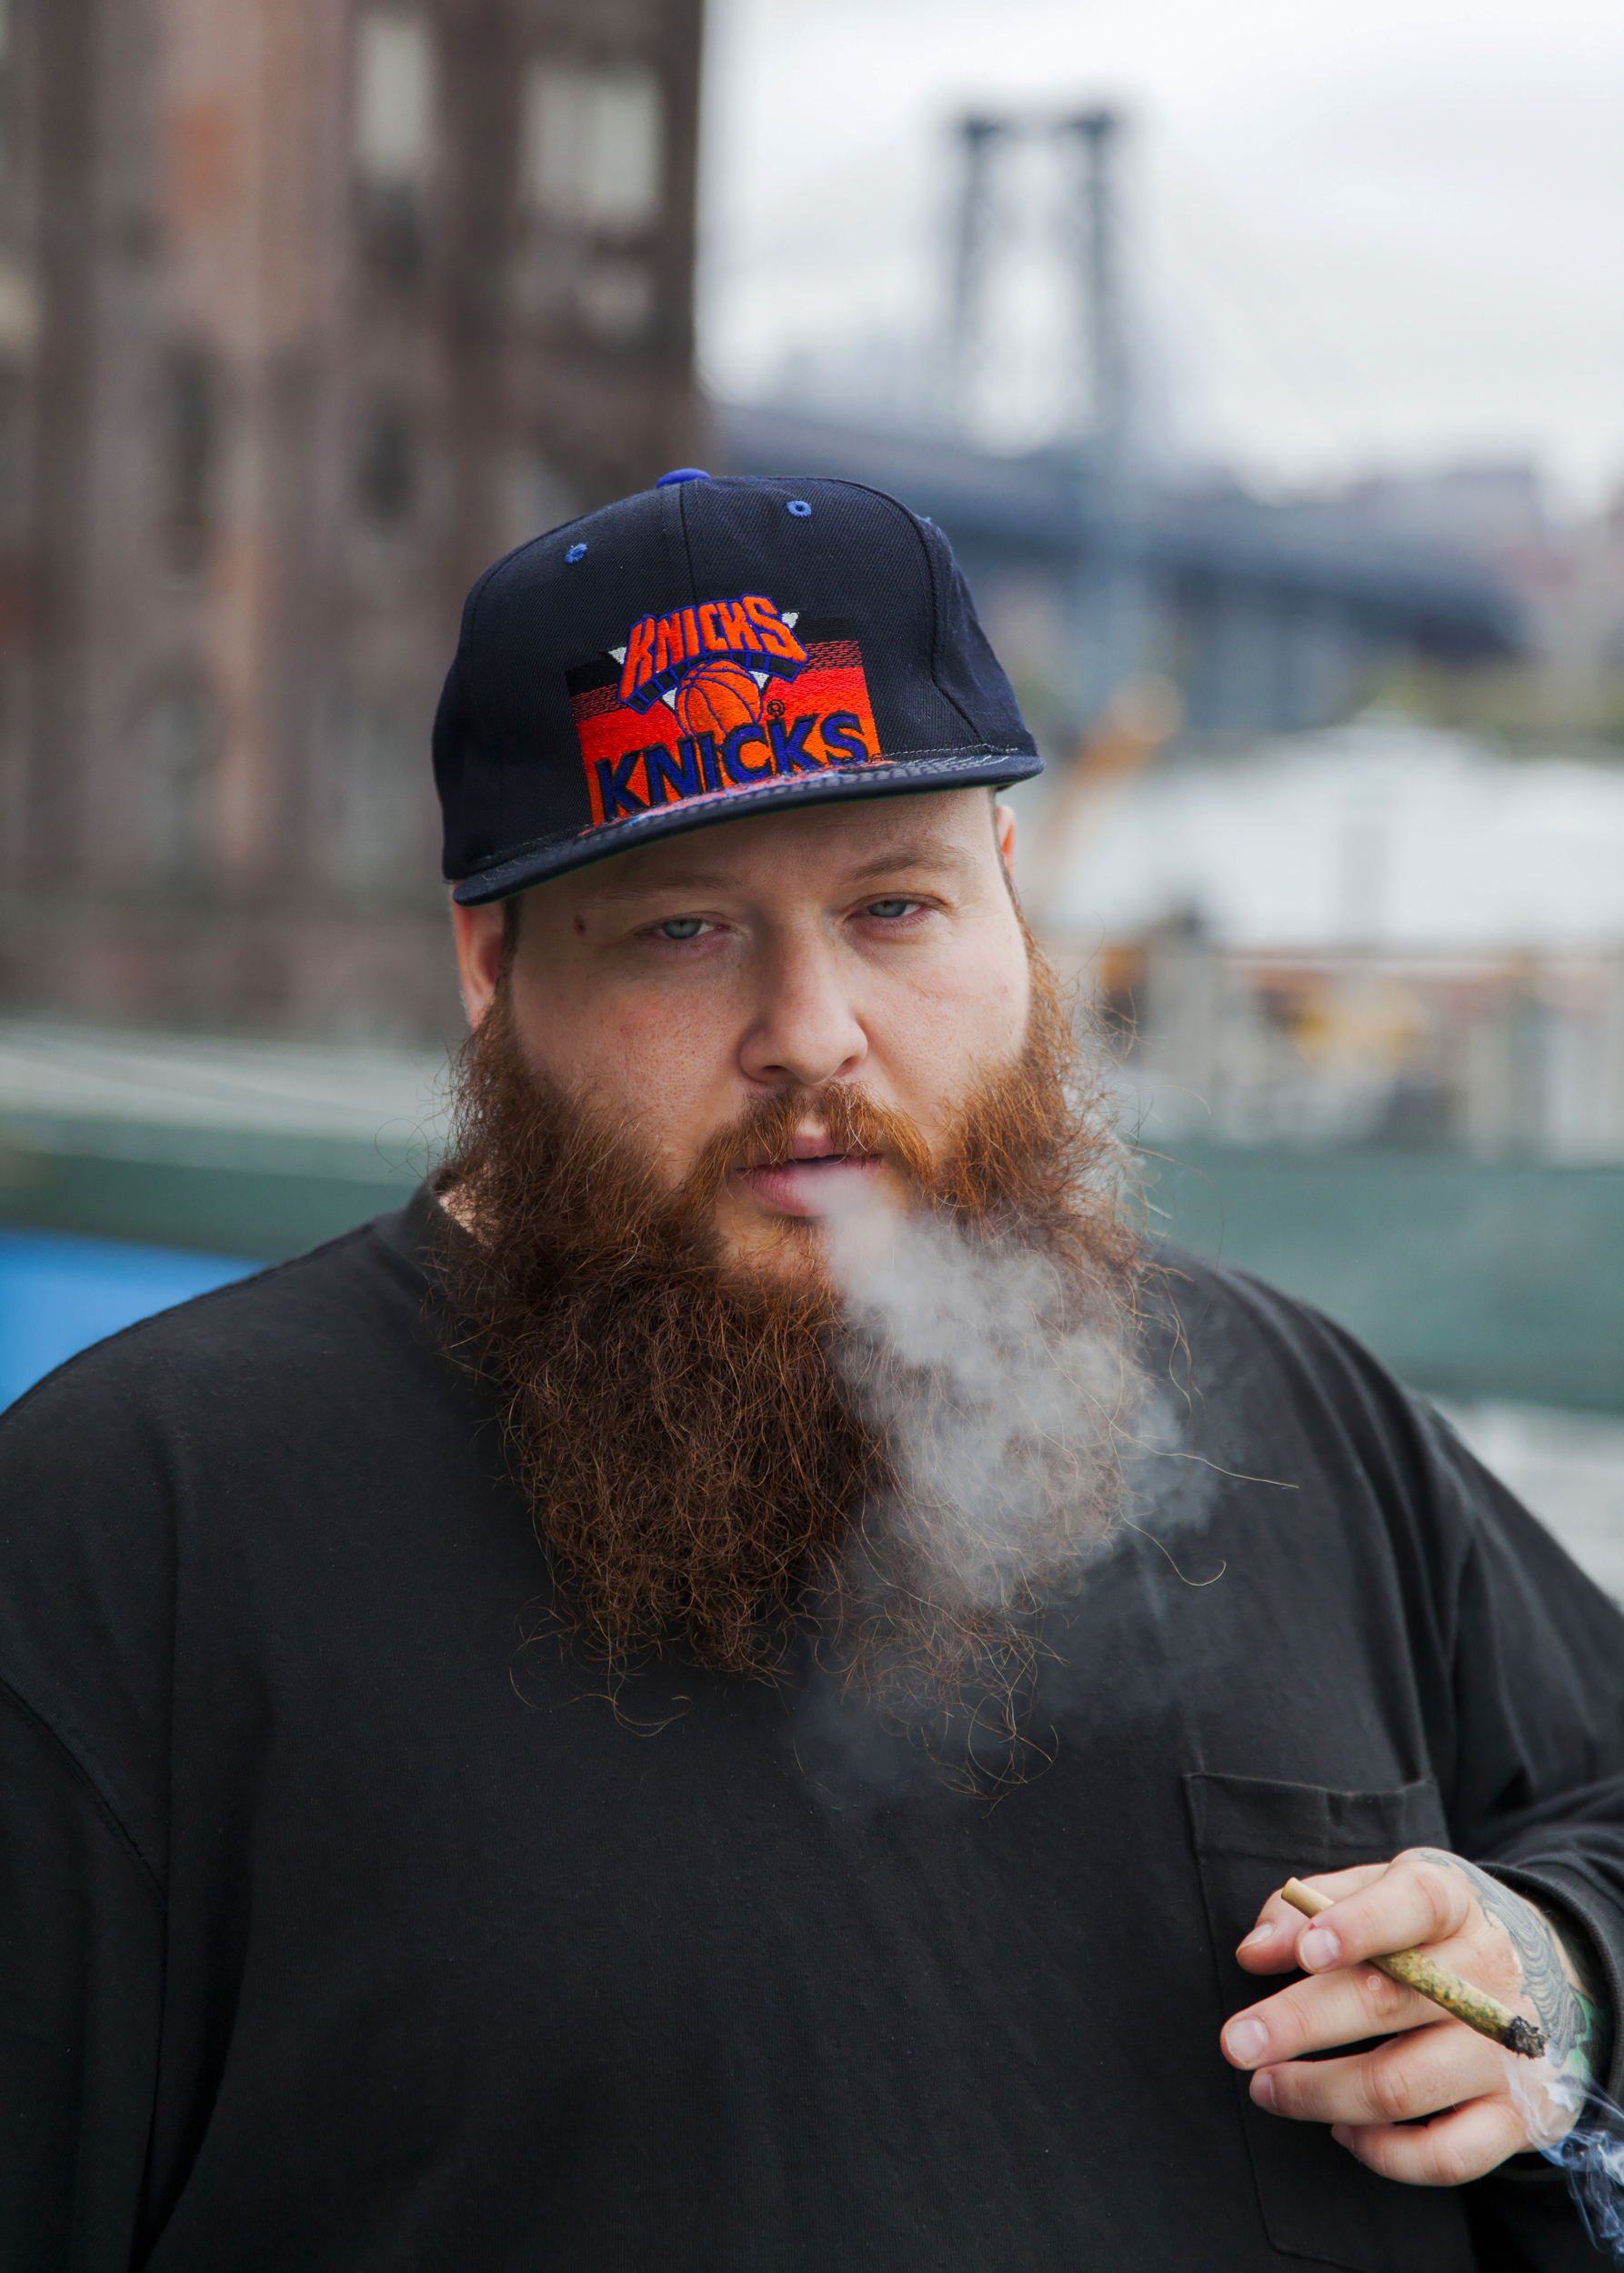 ActionBronson_10Inches.jpg